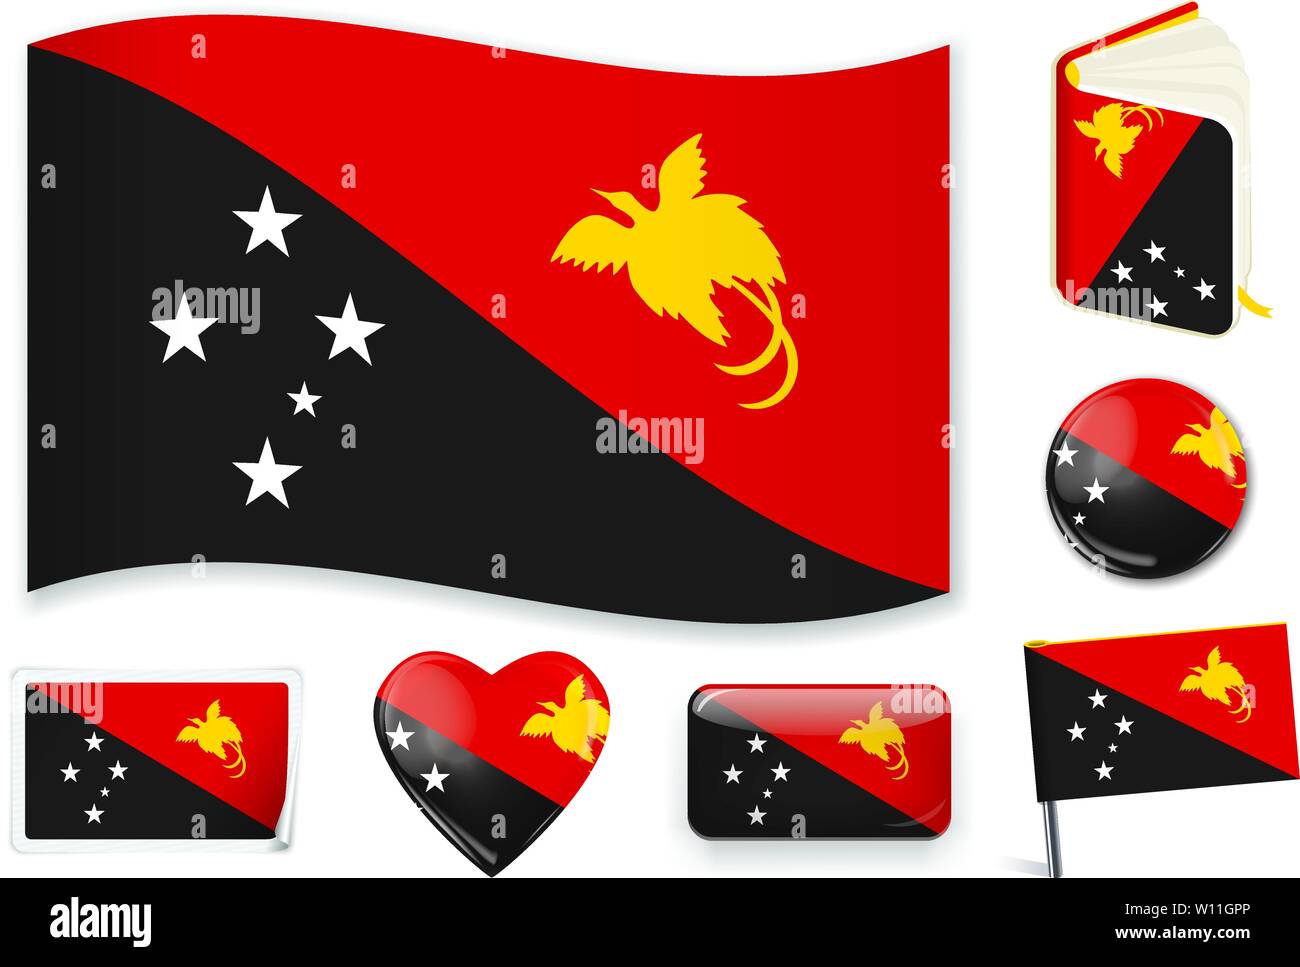 Papua New Guinea national flag. Vector illustration. 3 layers. Shadows, flat flag, lights and shadows. Collection of 220 world flags. Accurate colors. Easy changes. Stock Vector